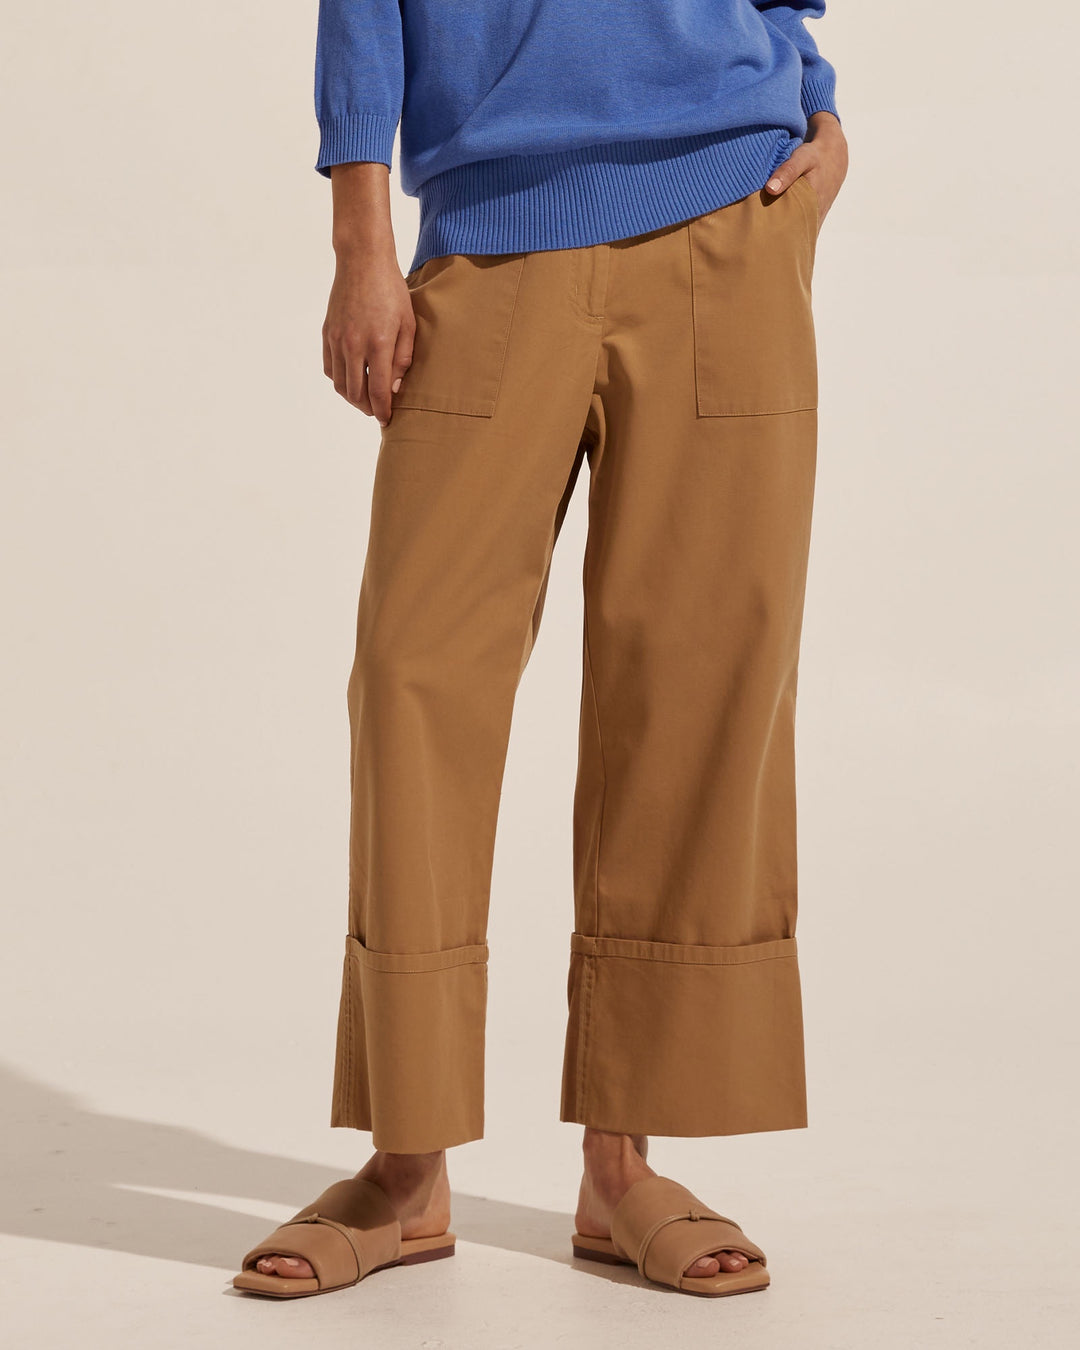 Collective Pant - Camel